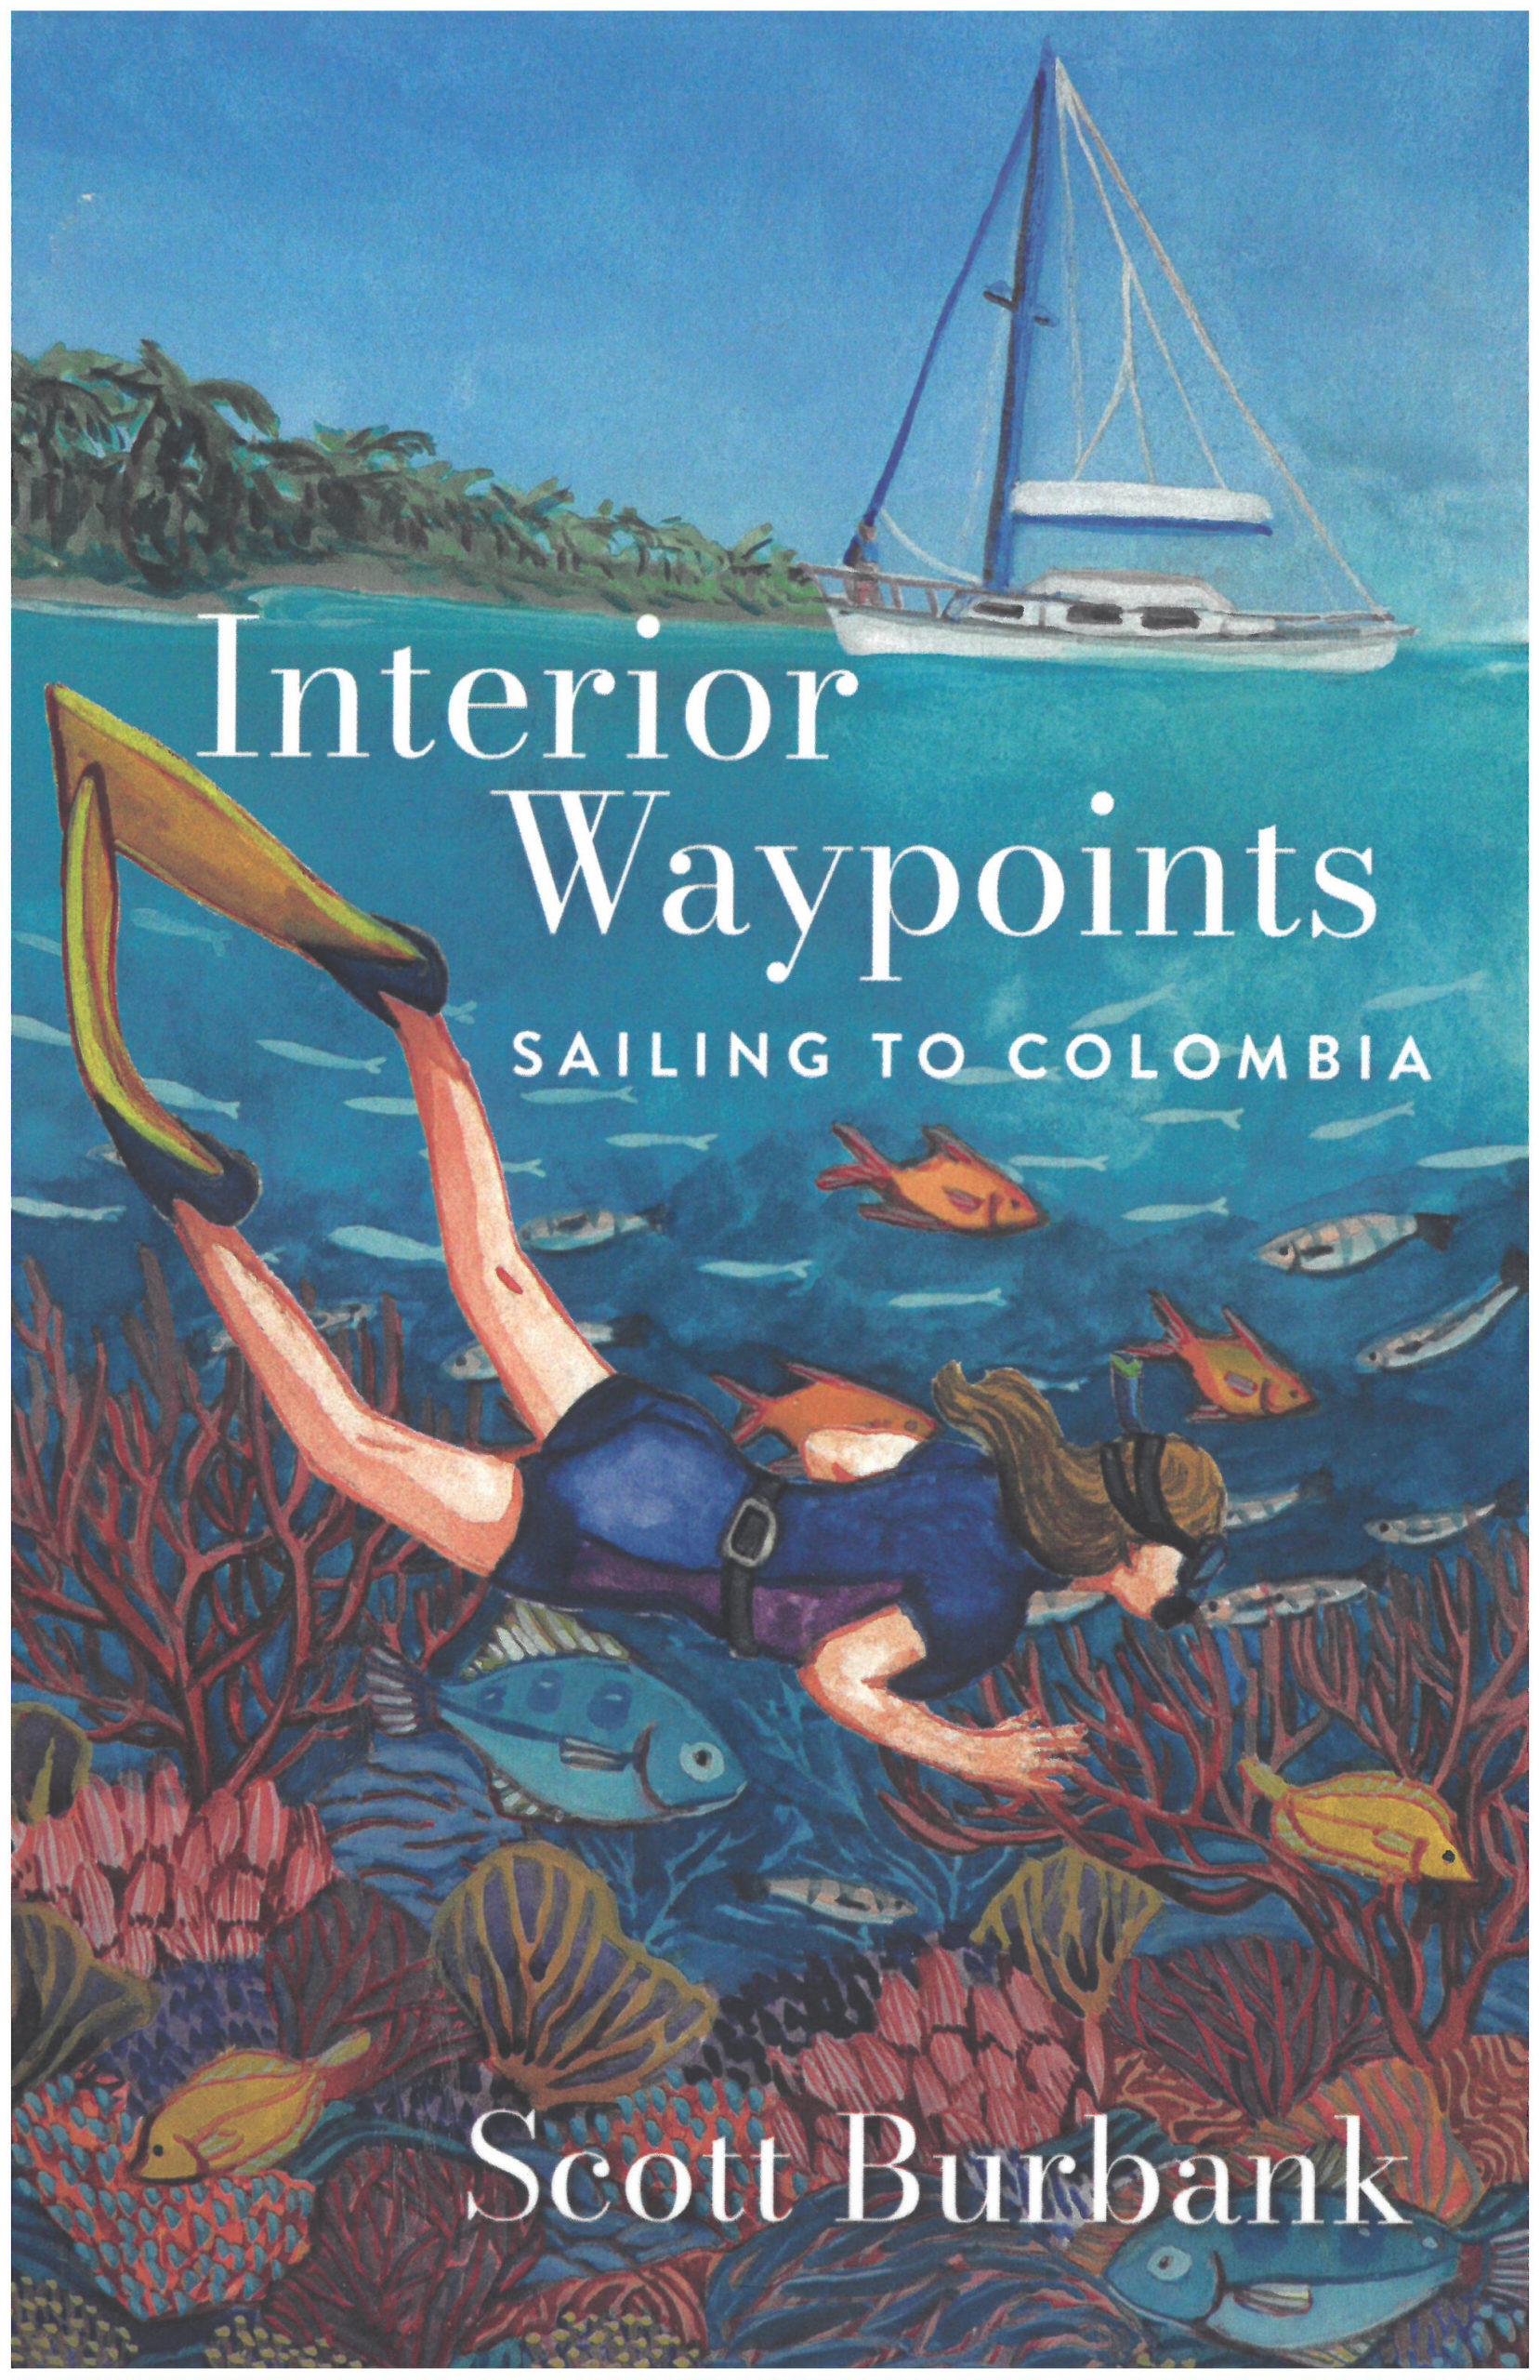 Homer artist Oceana Wills illustrated the cover of Scott Burbank’s “Interior Waypoints: Sailing to Colombia.”